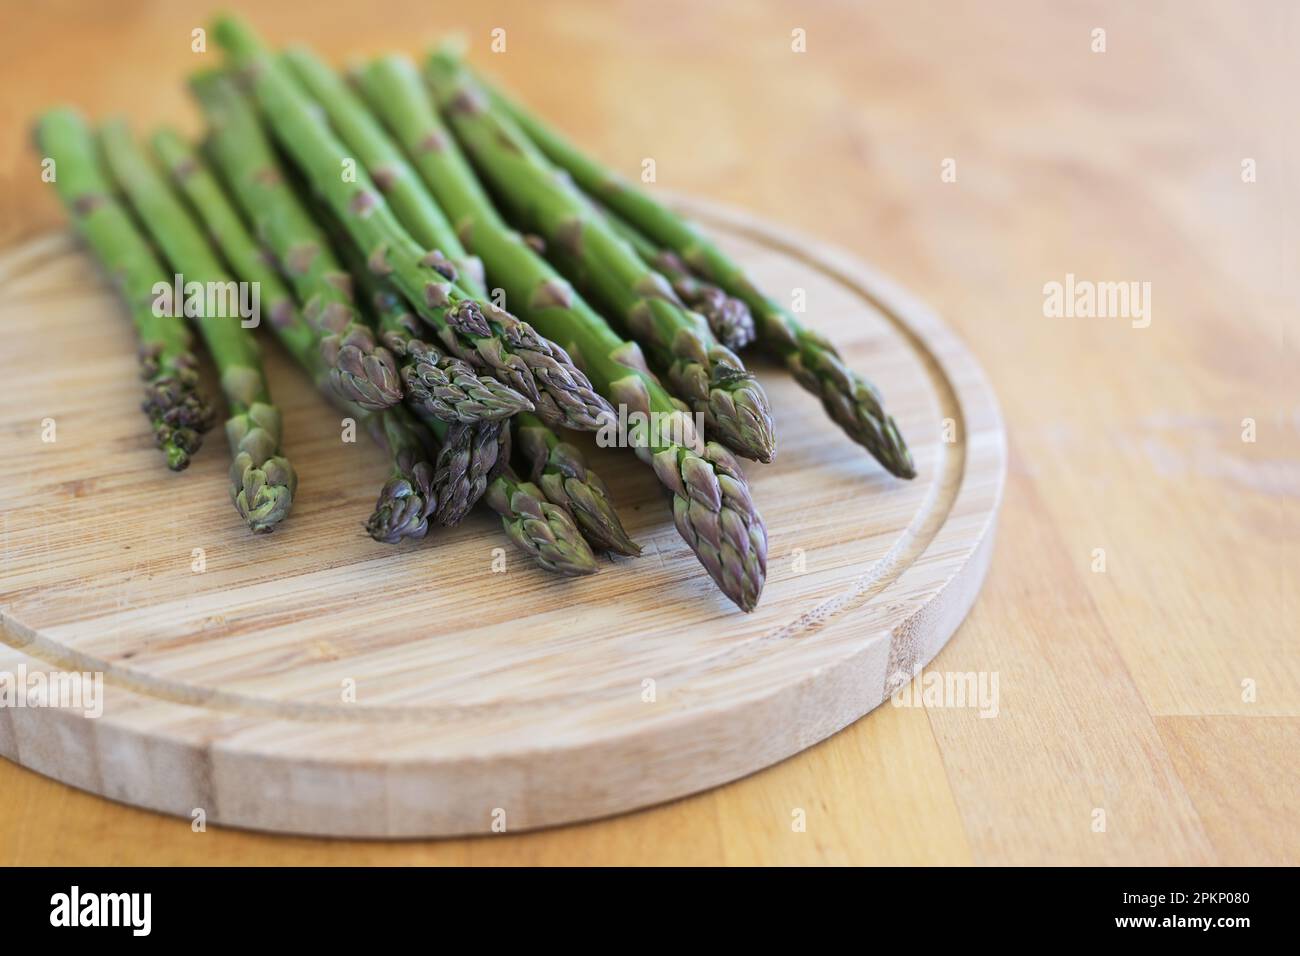 Fresh green asparagus on a cutting board and a wooden table, delicious spring time vegetables, copy space, selected focus, narrow depth of field Stock Photo